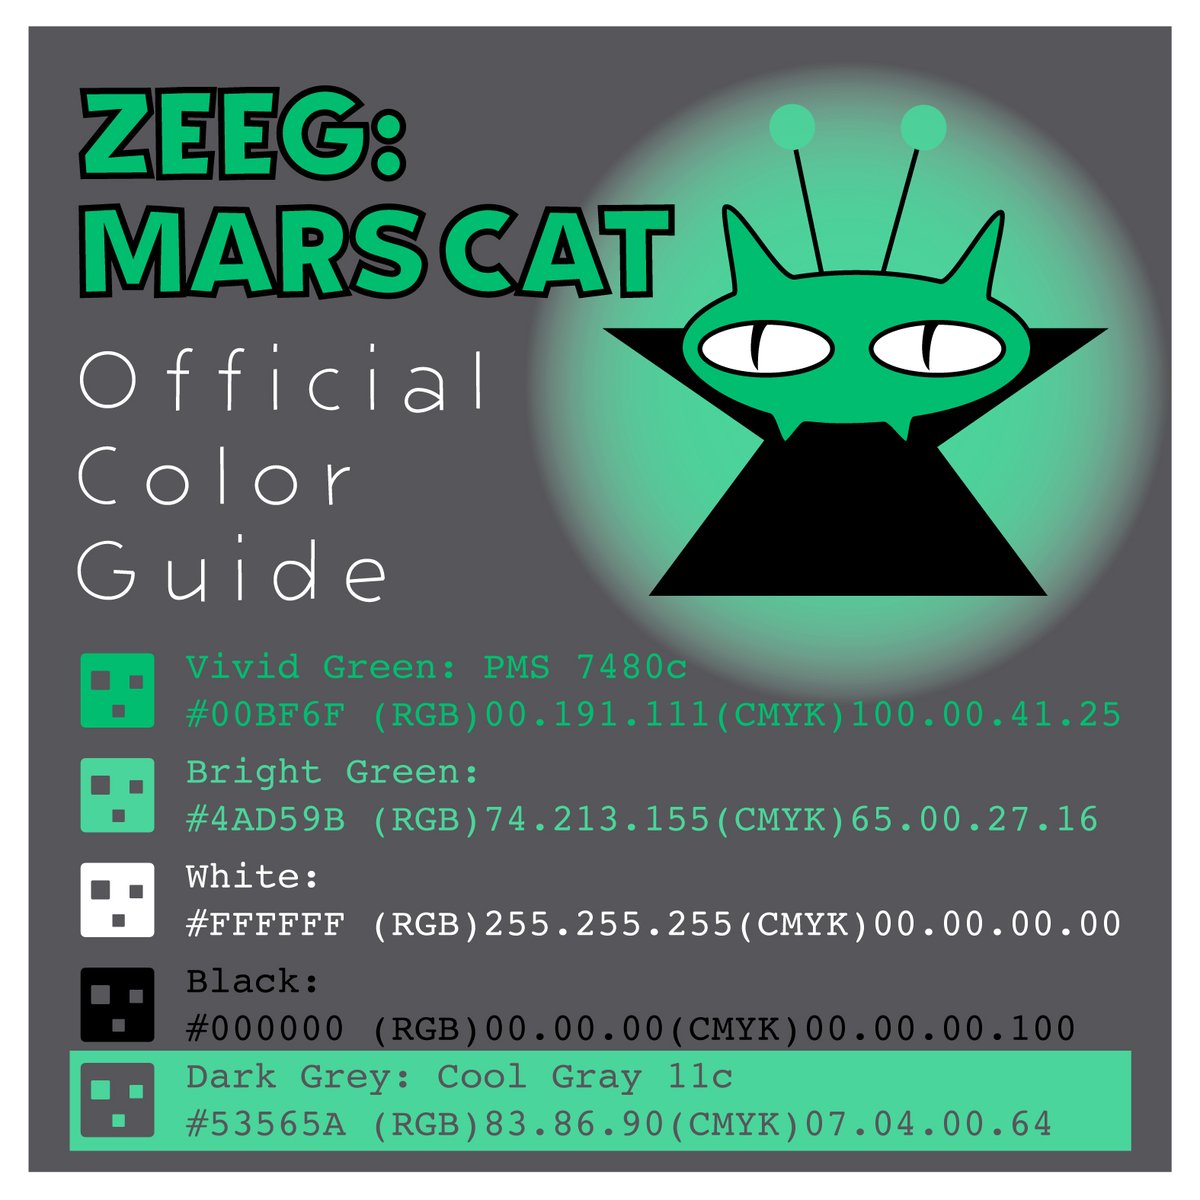 For those wanting to follow along and design their own Zeeg, here are the official specs to follow.

#Gabolical #ItsgabboGabe #Itsgabbo #GabeEly #Gabe #ZeegMarsCat #Zeeg #MarsCat #cat #colorguide #designguide #styleguide #guide #GabolicalDesign #GabolicalStyle #officialstyle